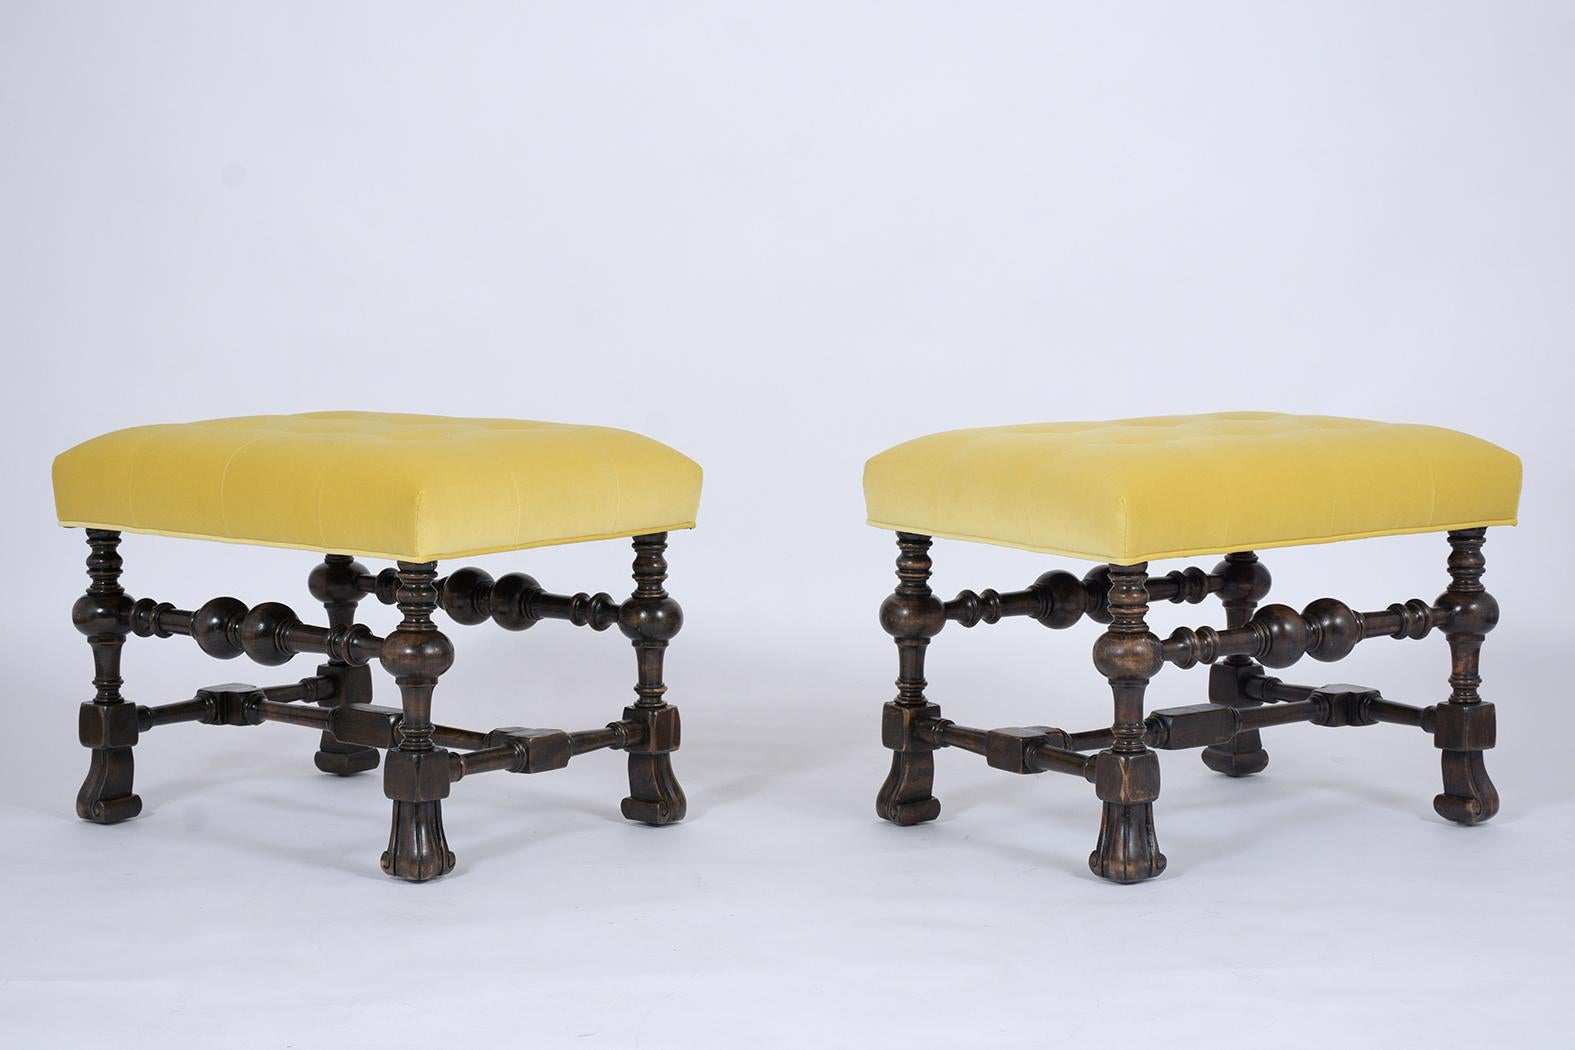 An eye-catching pair of Baroque Ottomans crafted out of walnut wood with a newly lacquered finish and have been fully restored. The pair is newly upholstered in a yellow color velvet fabric, new foam inserts with a tufted cushion design, and